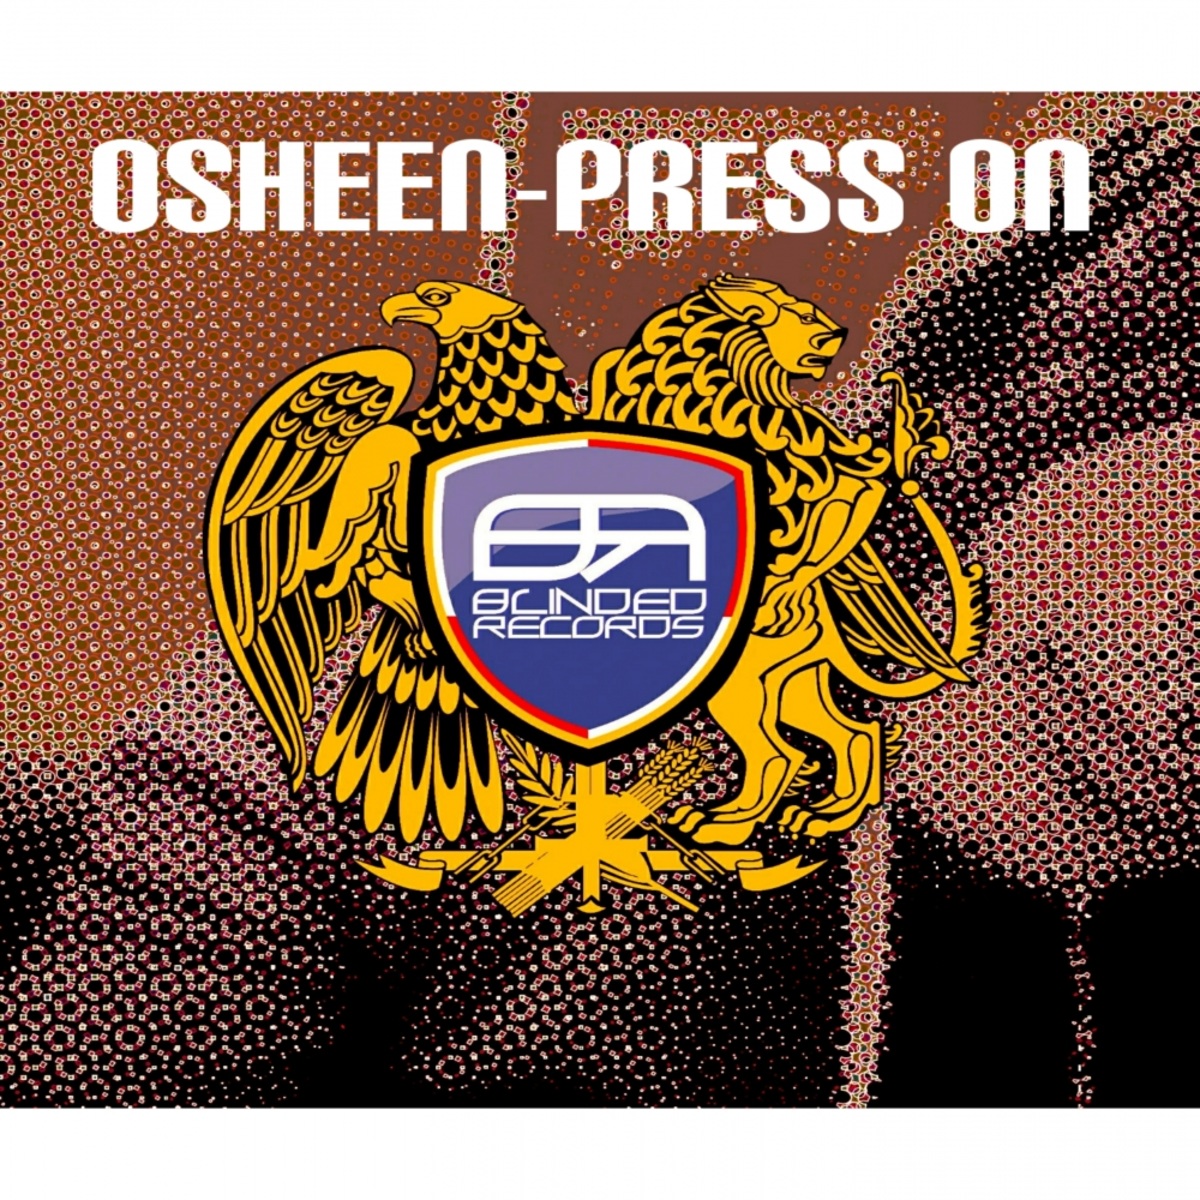 Osheen - Press On / Blinded Records